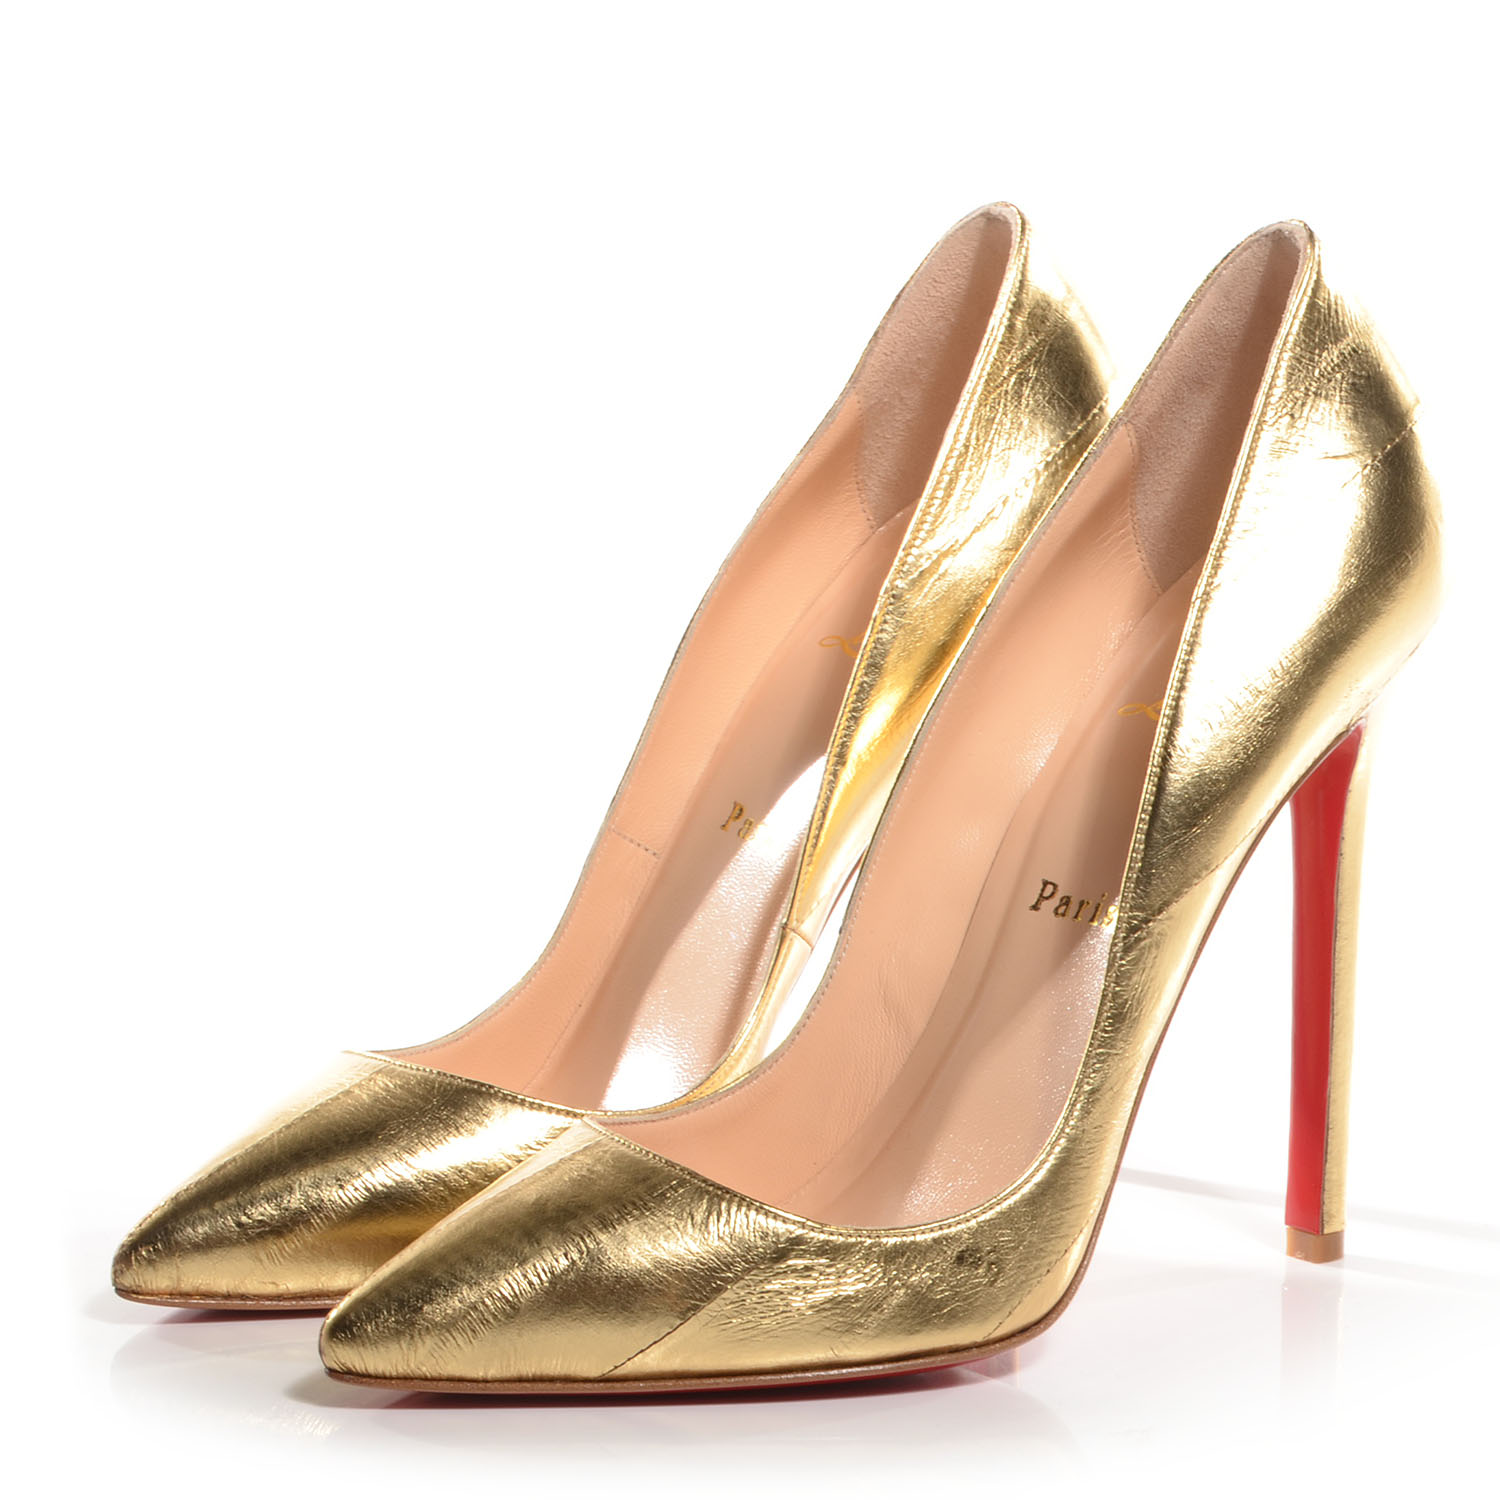 CHRISTIAN LOUBOUTIN Eel Pigalle 120 Pumps 38 Gold 73082